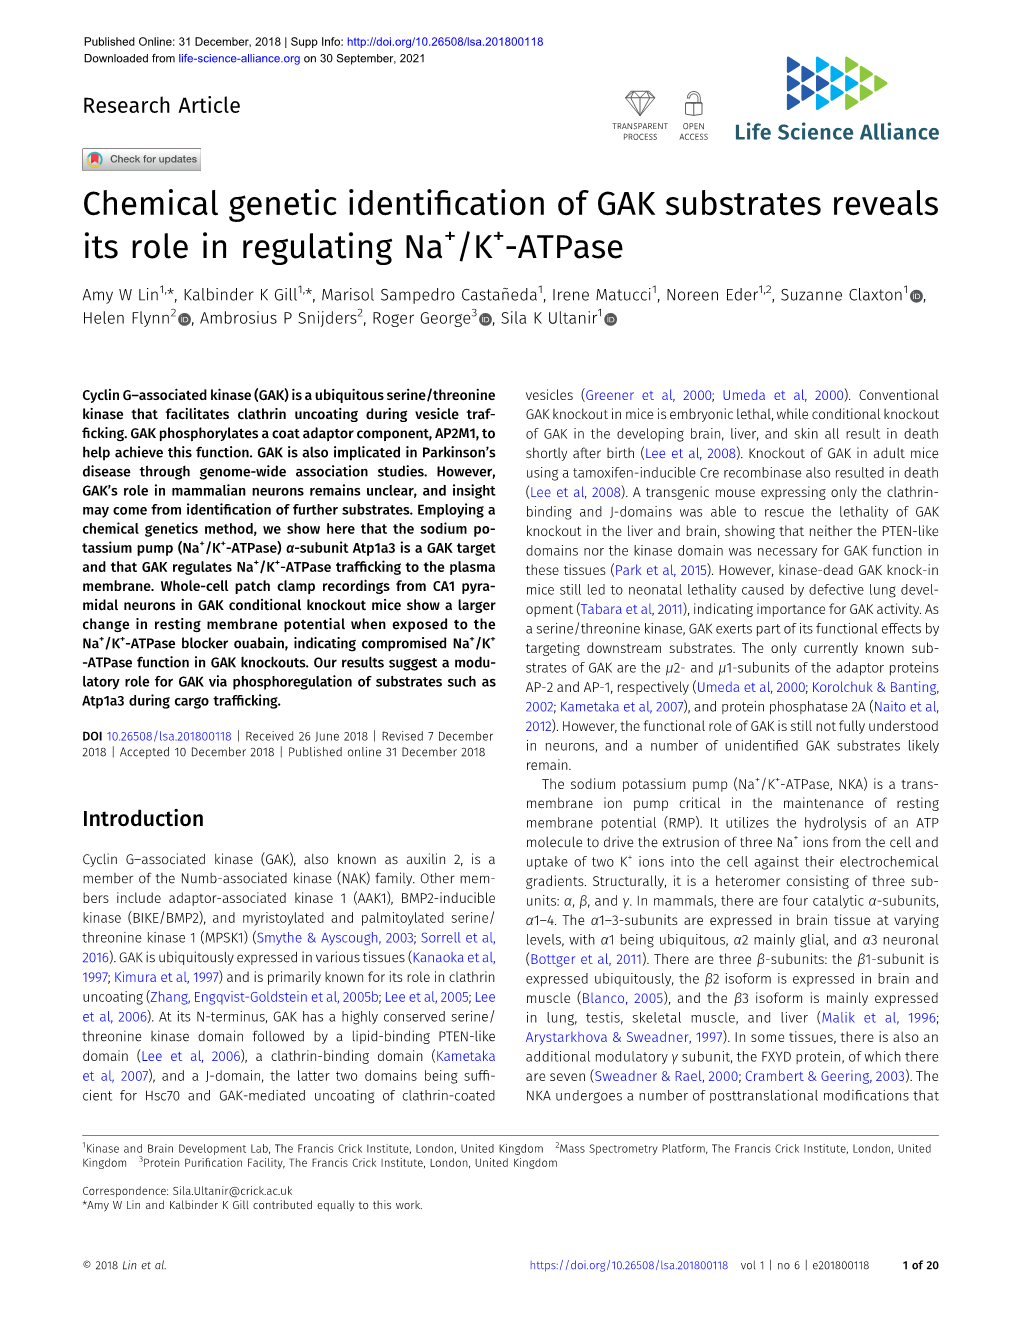 Chemical Genetic Identification of GAK Substrates Reveals Its Role In